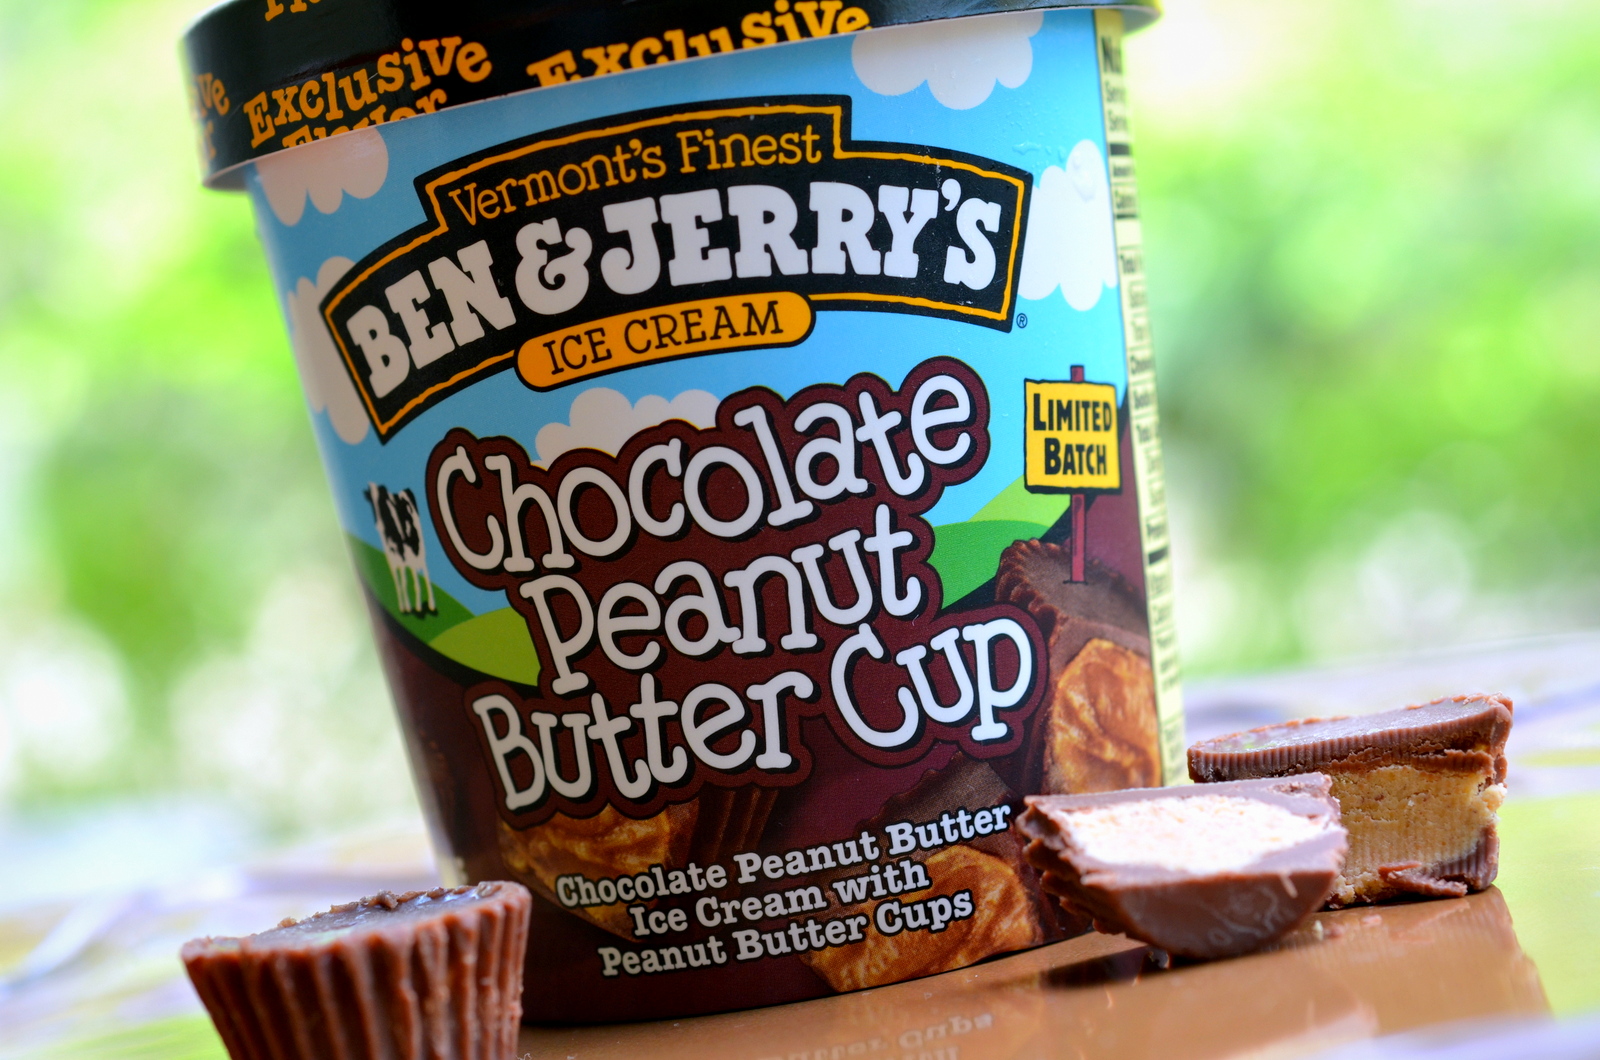 food and ice cream recipes: REVIEW: Ben & Jerry's Chocolate Peanut